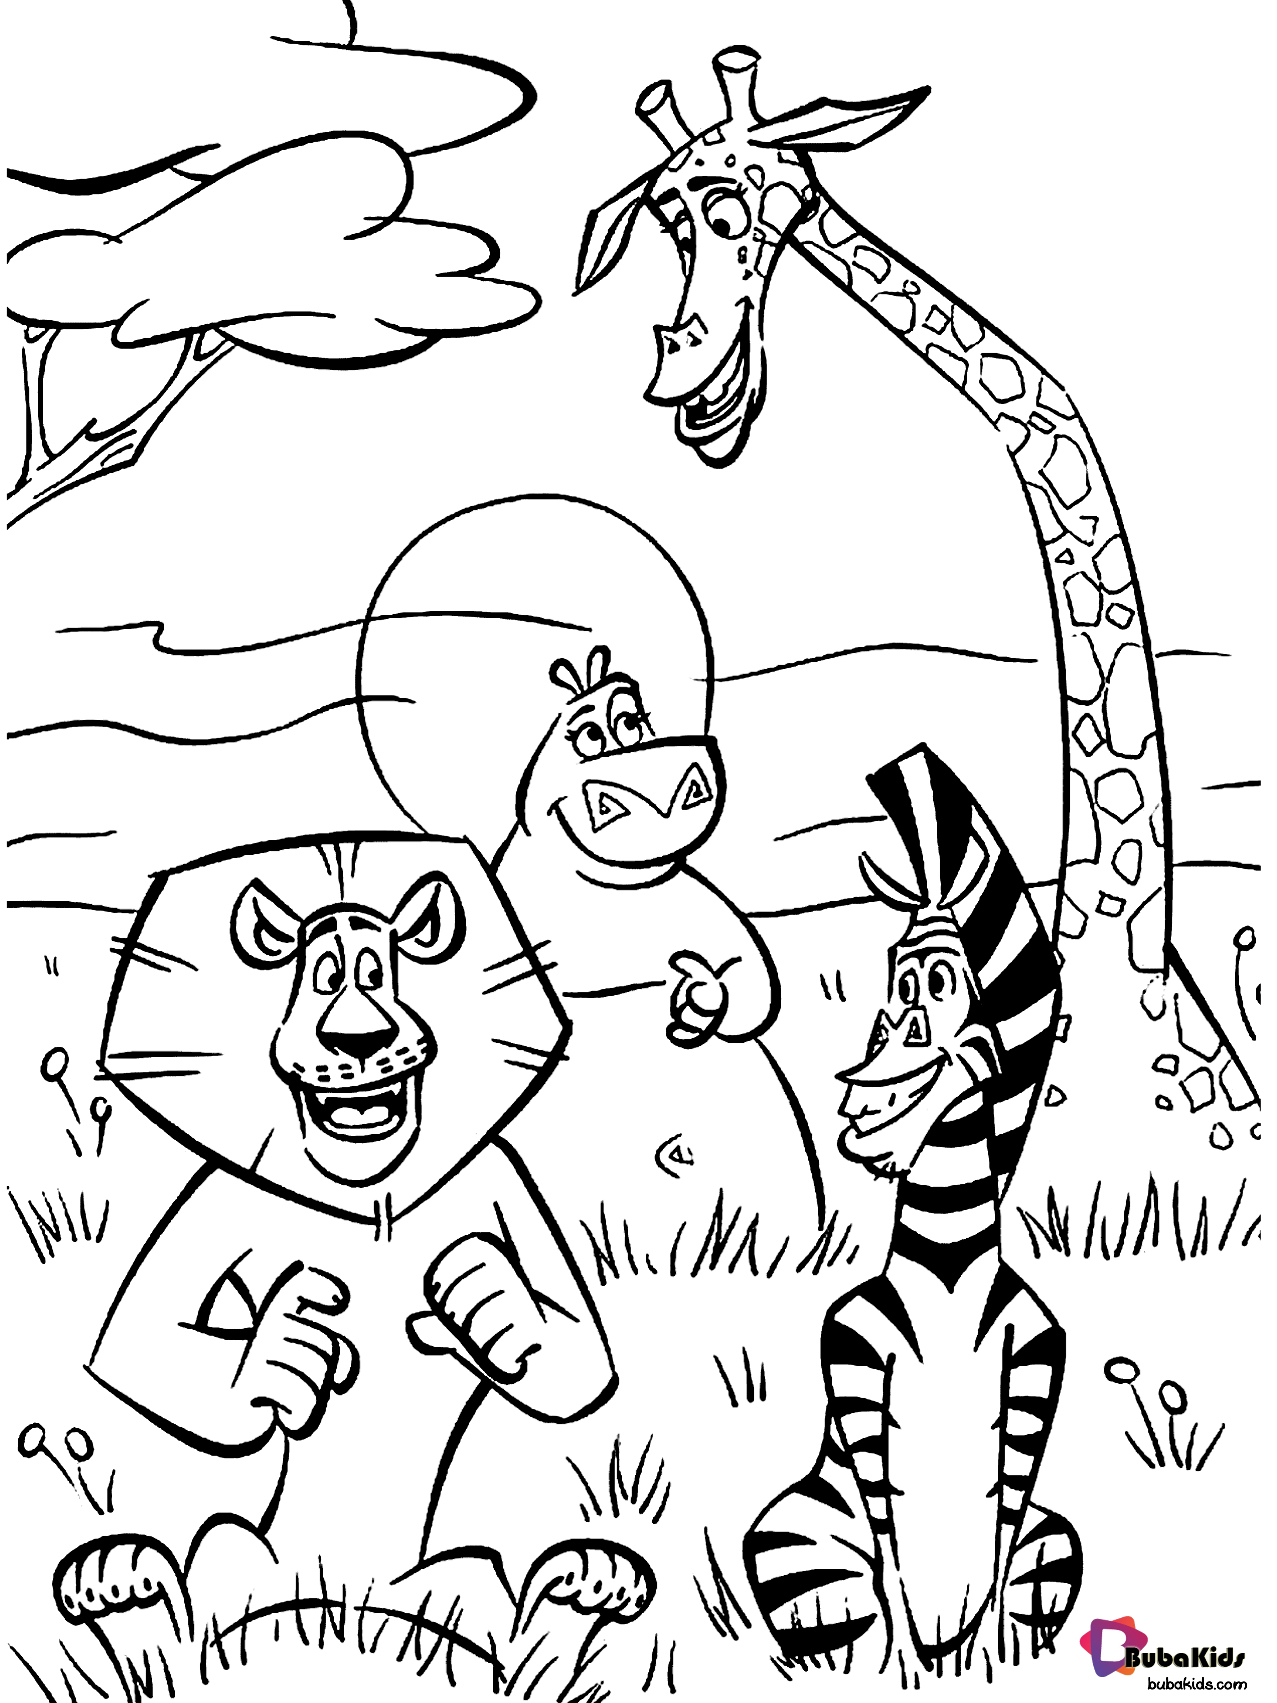 Madagascar movie characters coloring page Wallpaper